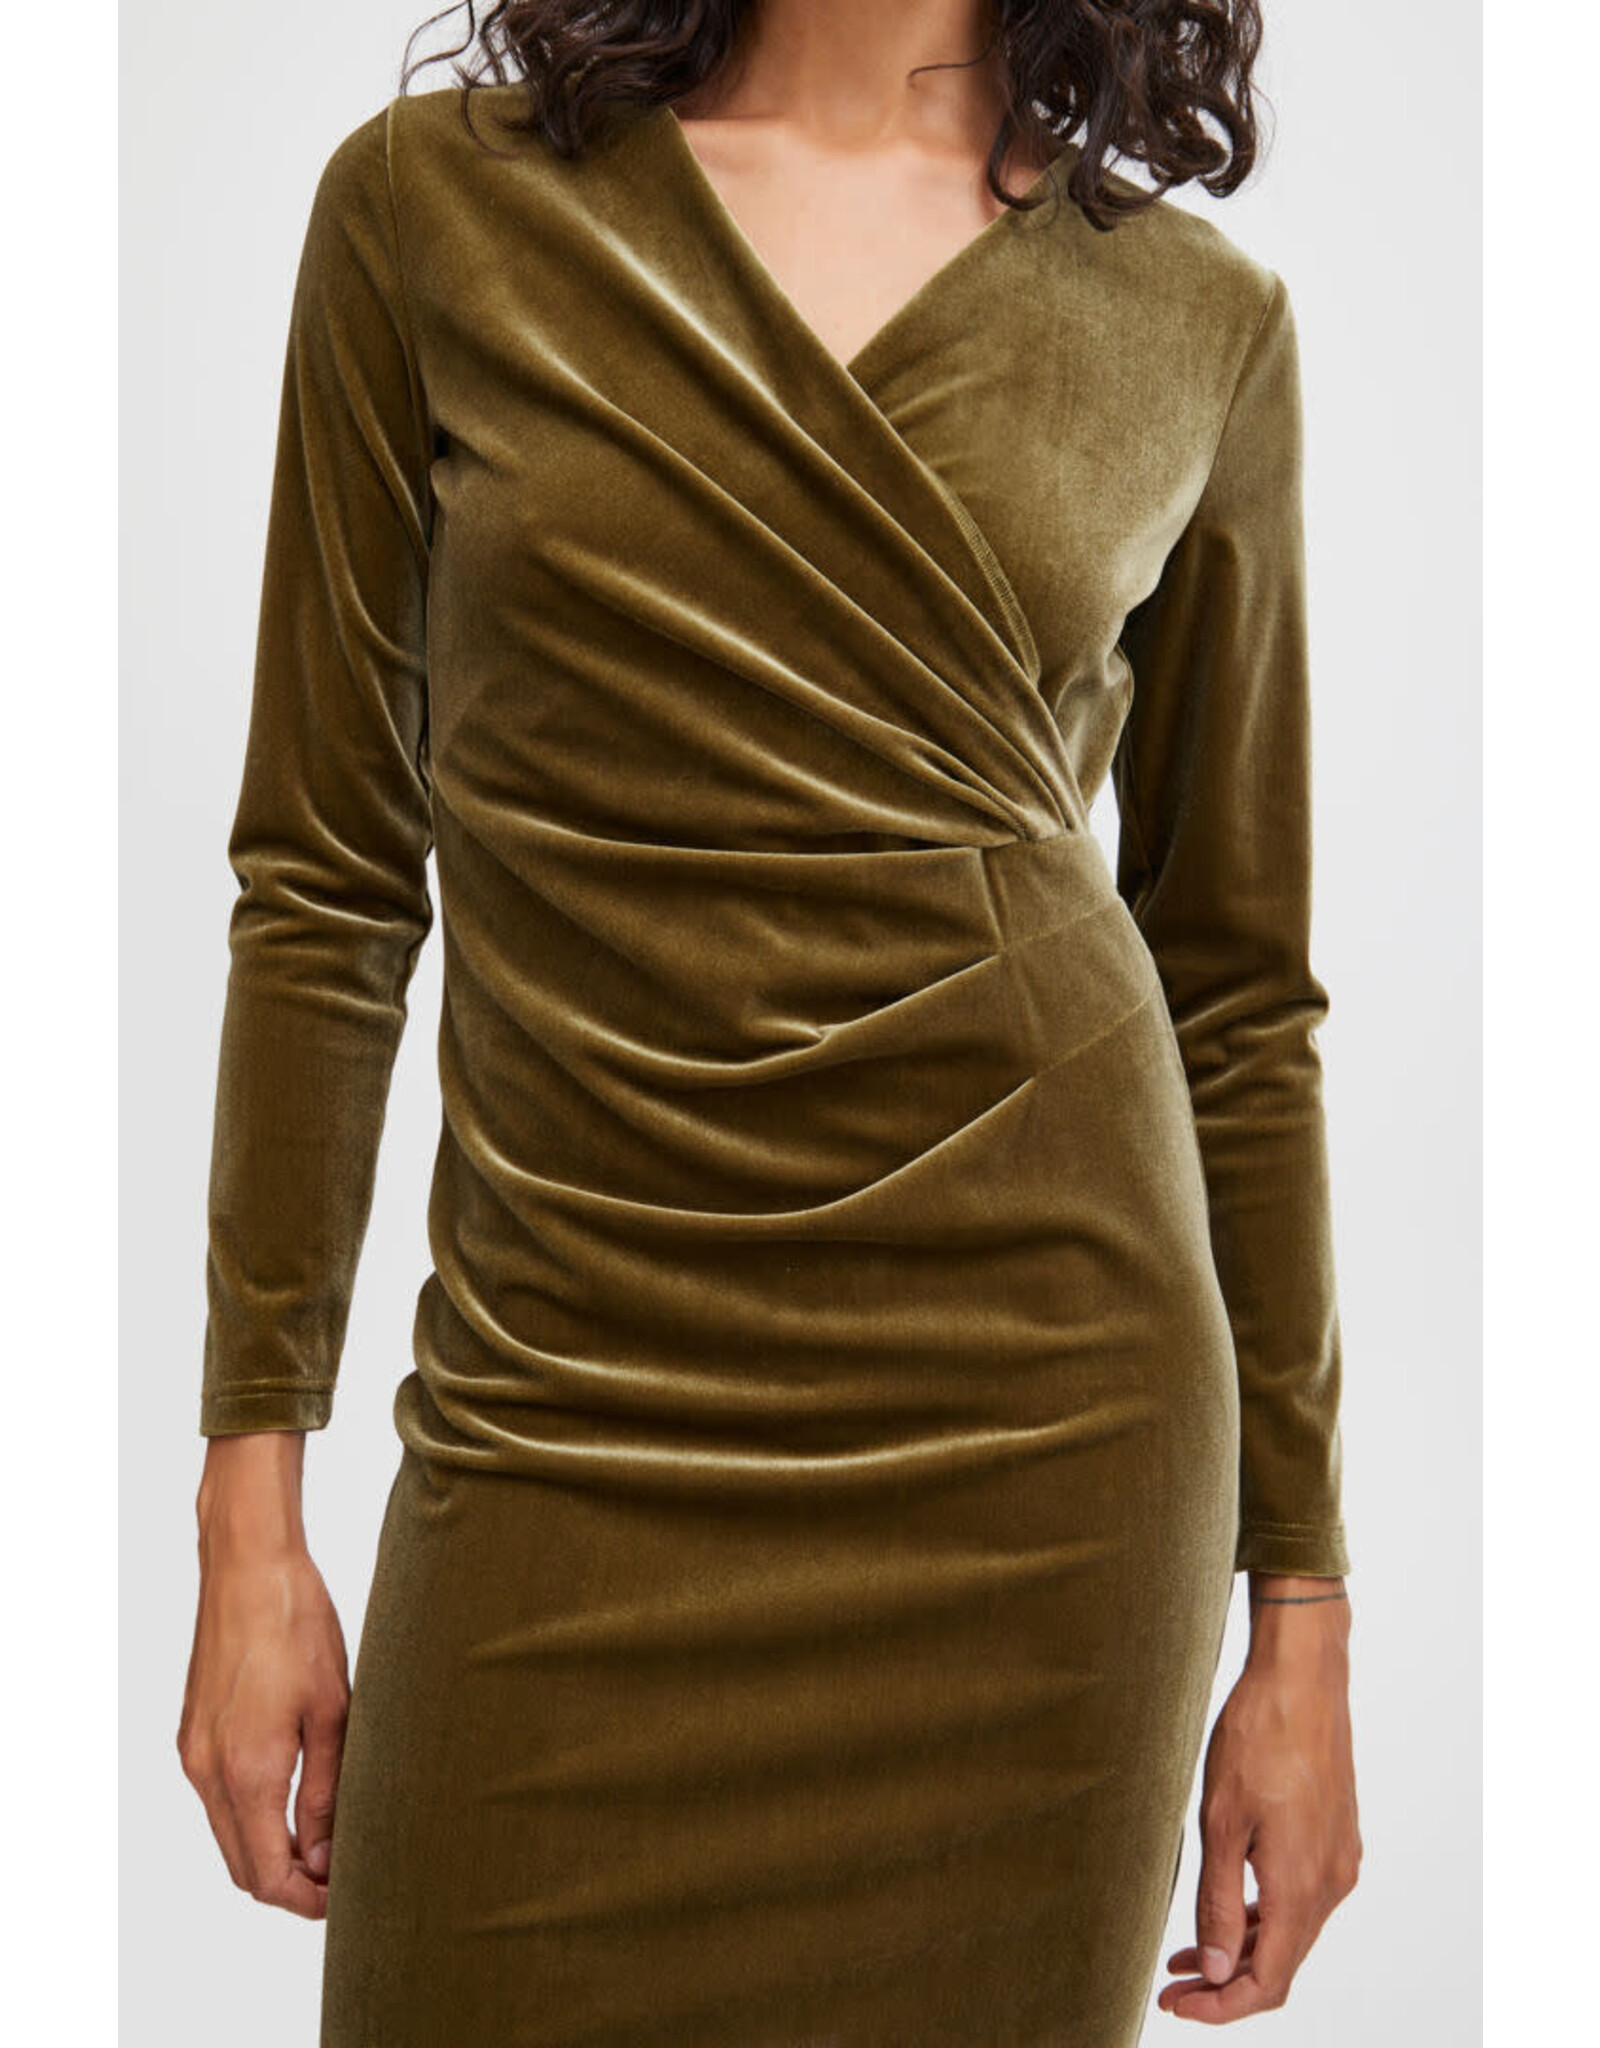 b.young b.young - Perlina dress (military olive)